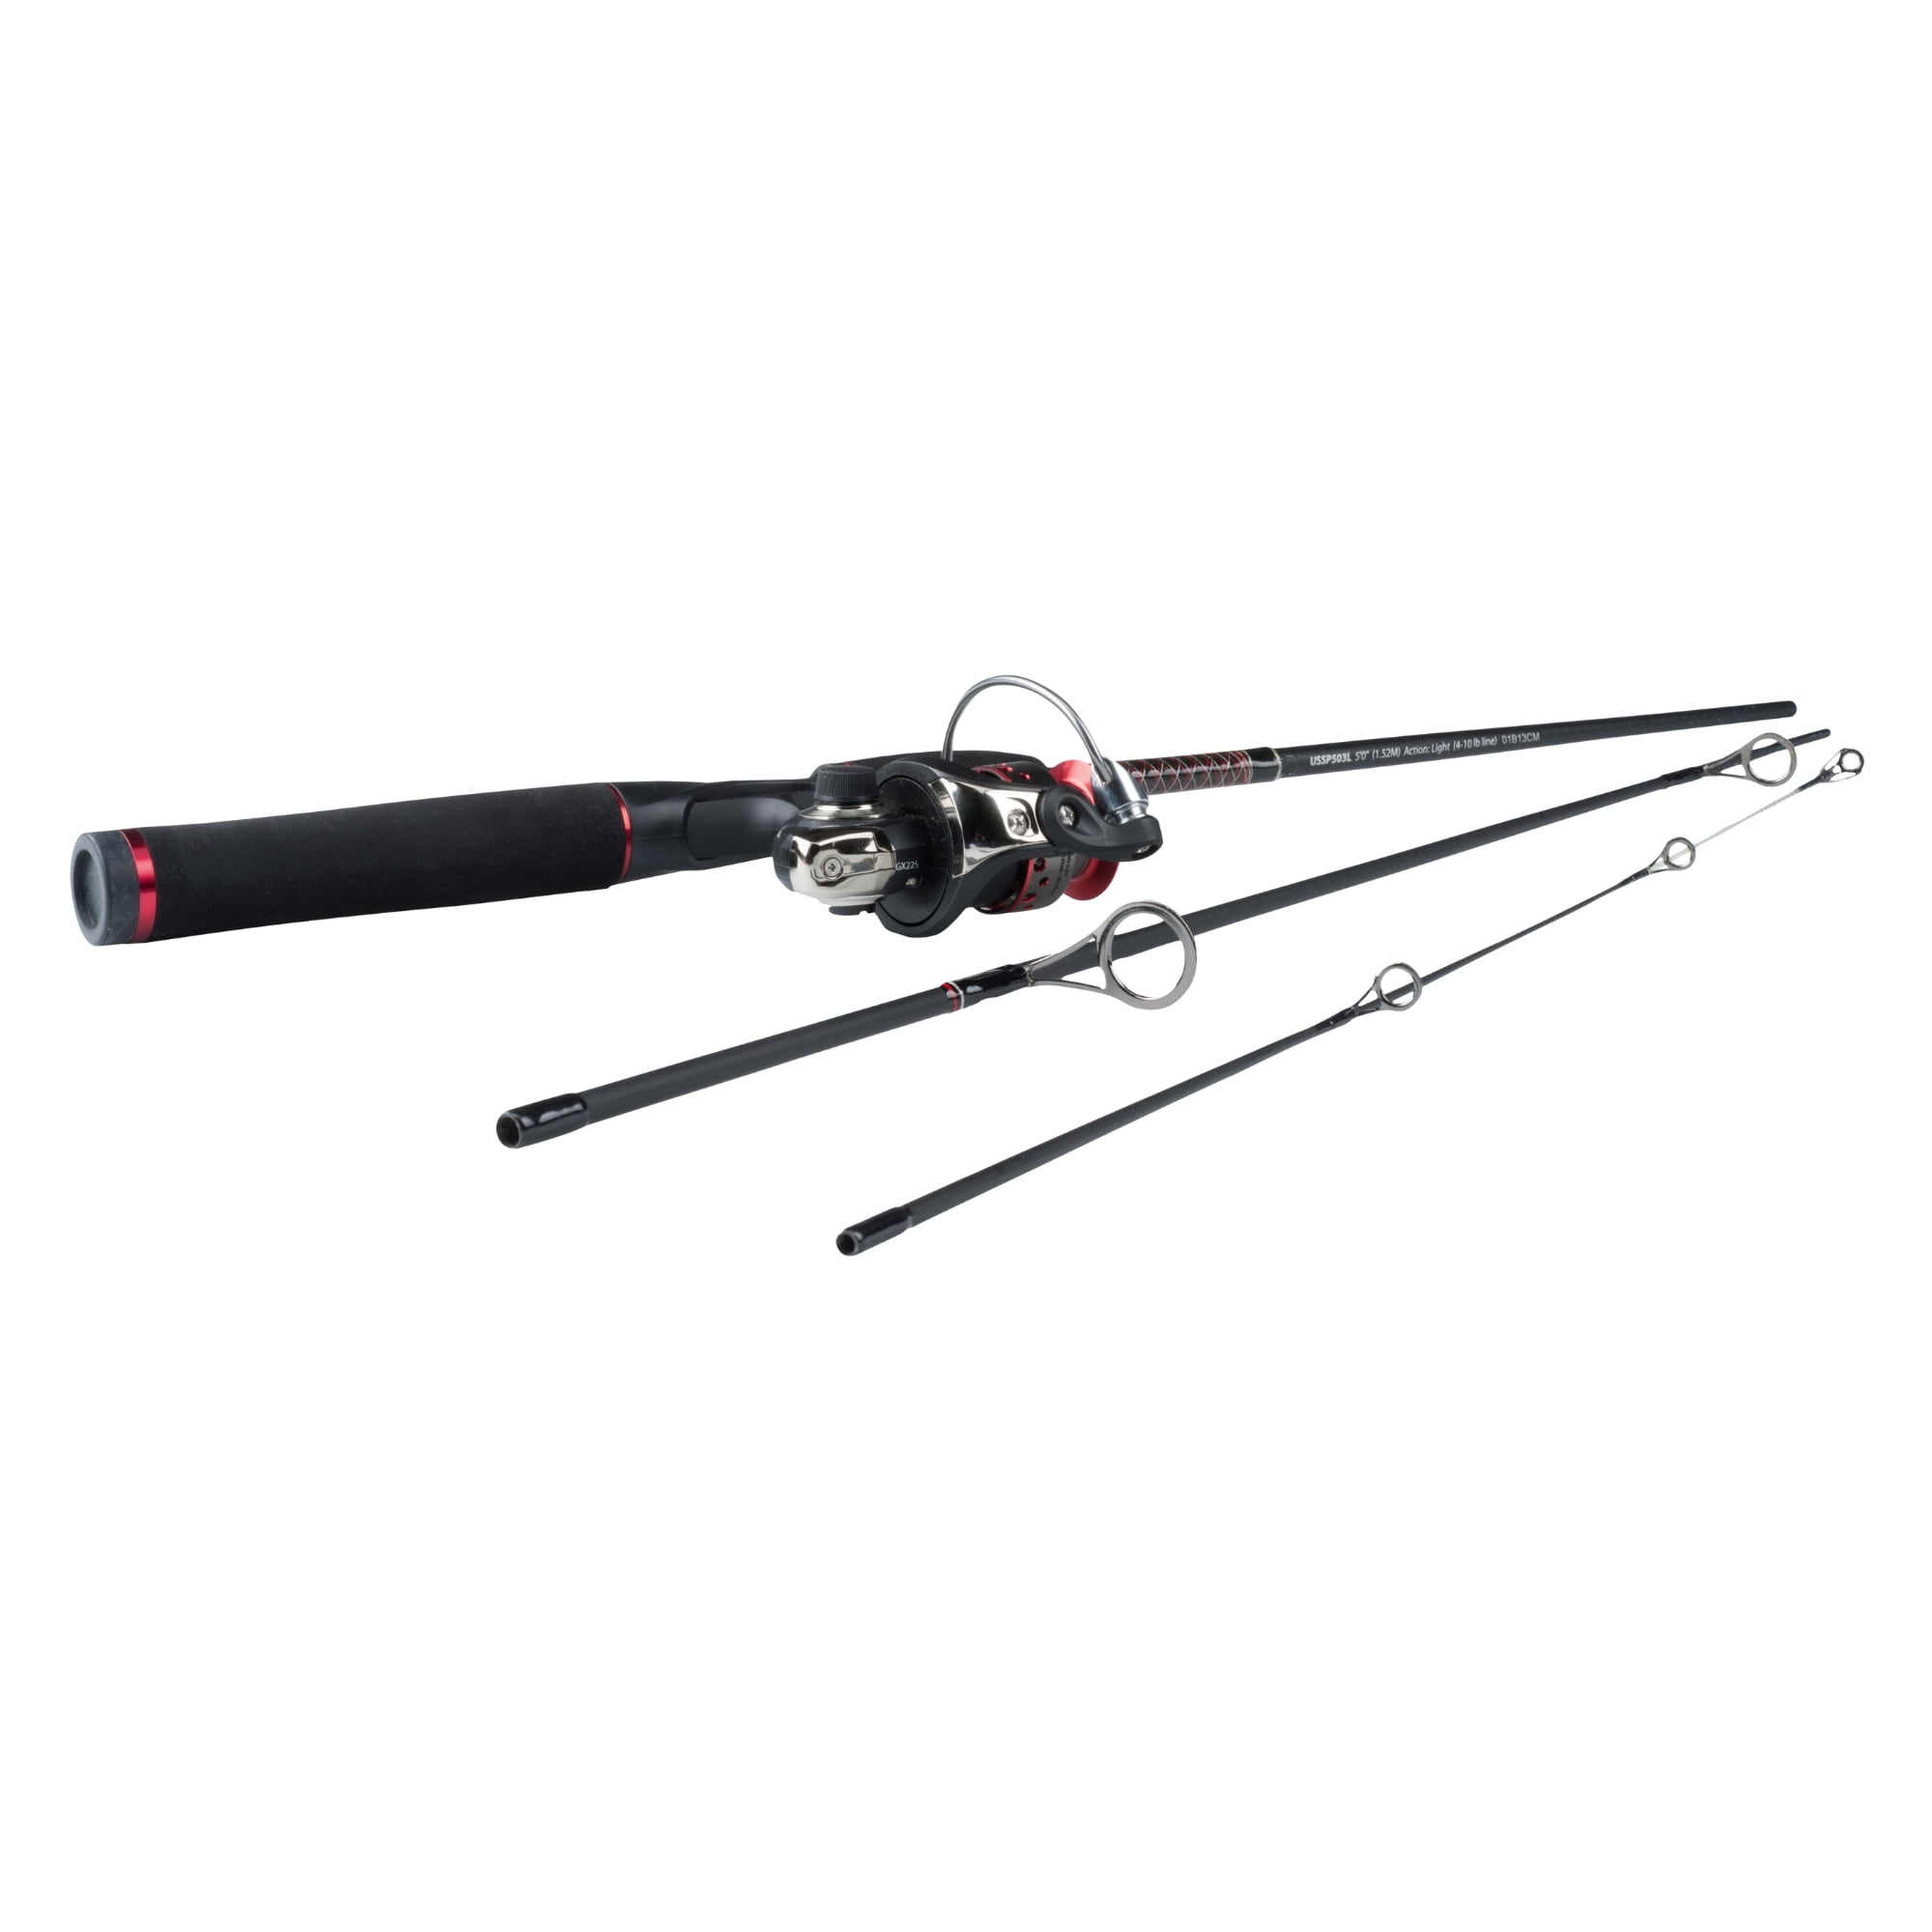 Ugly Stik 6’6” GX2 Travel Fishing Rod and Reel Spinning Combo